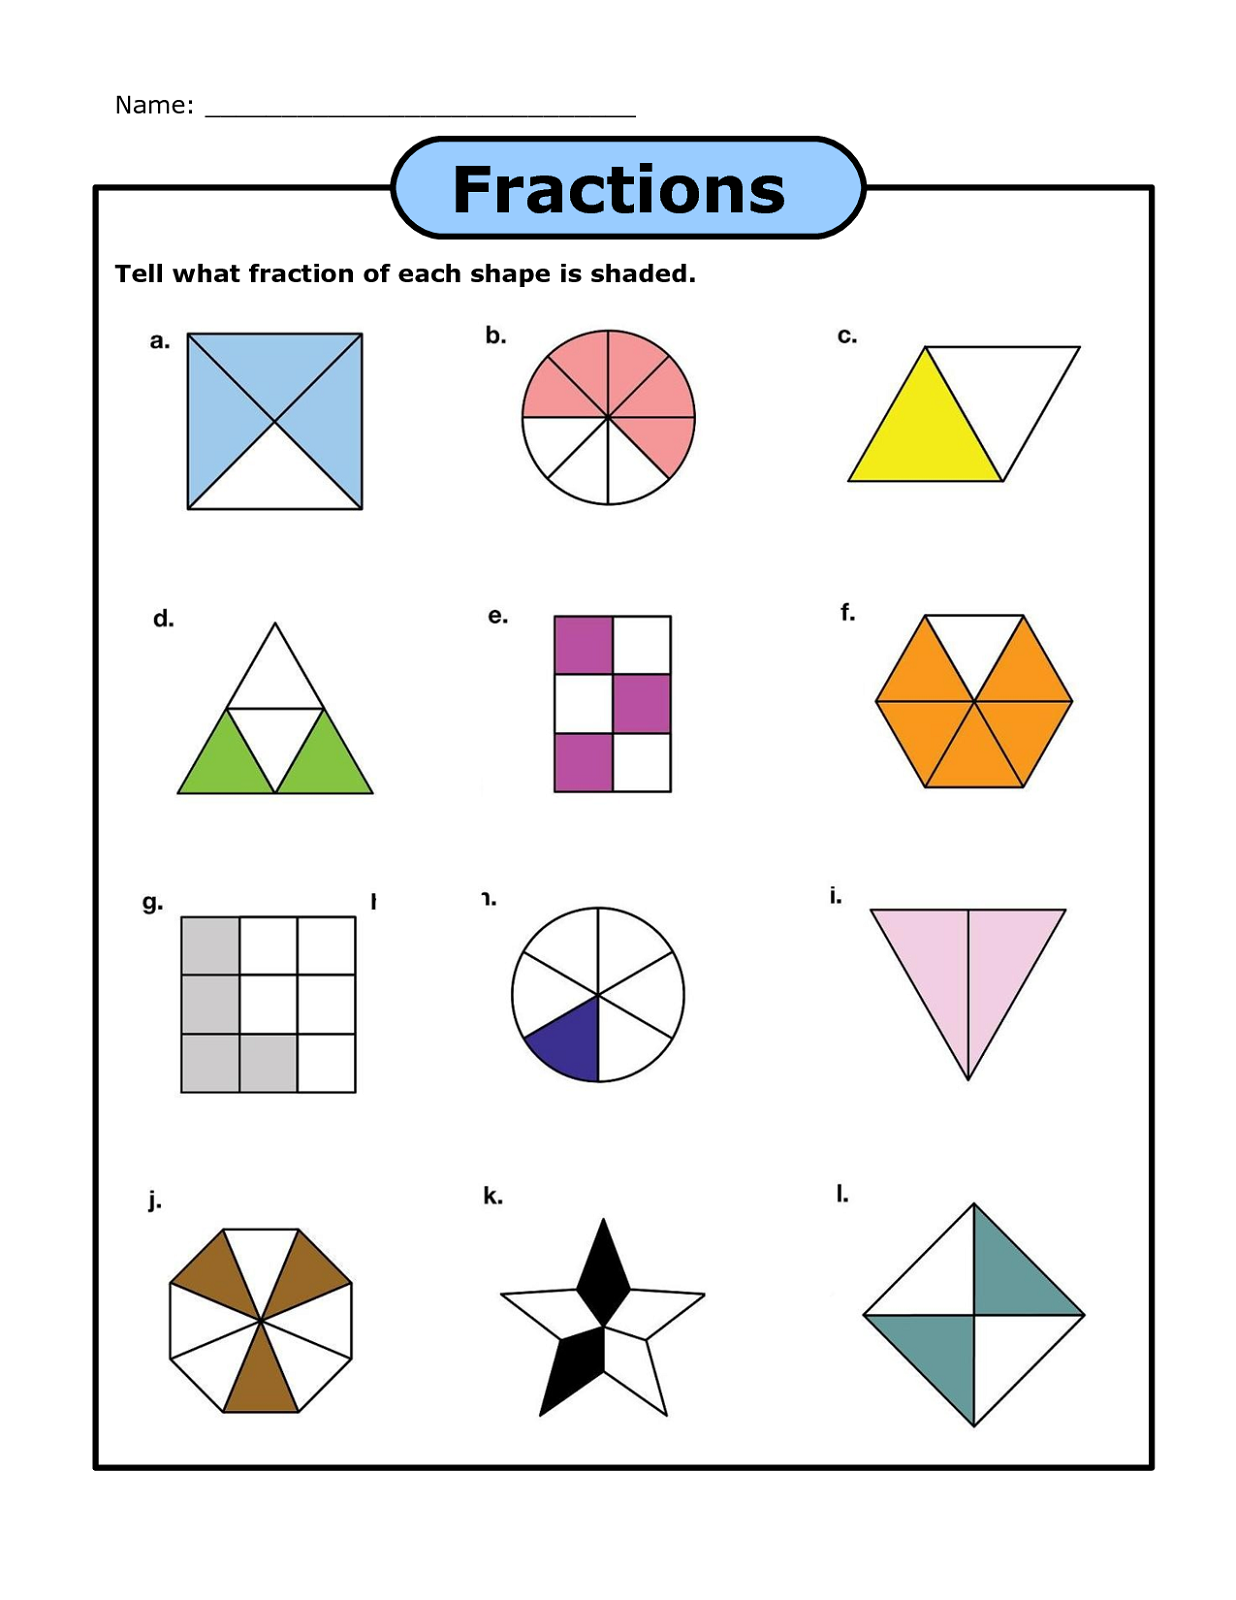 Fractions worksheets shape shaded